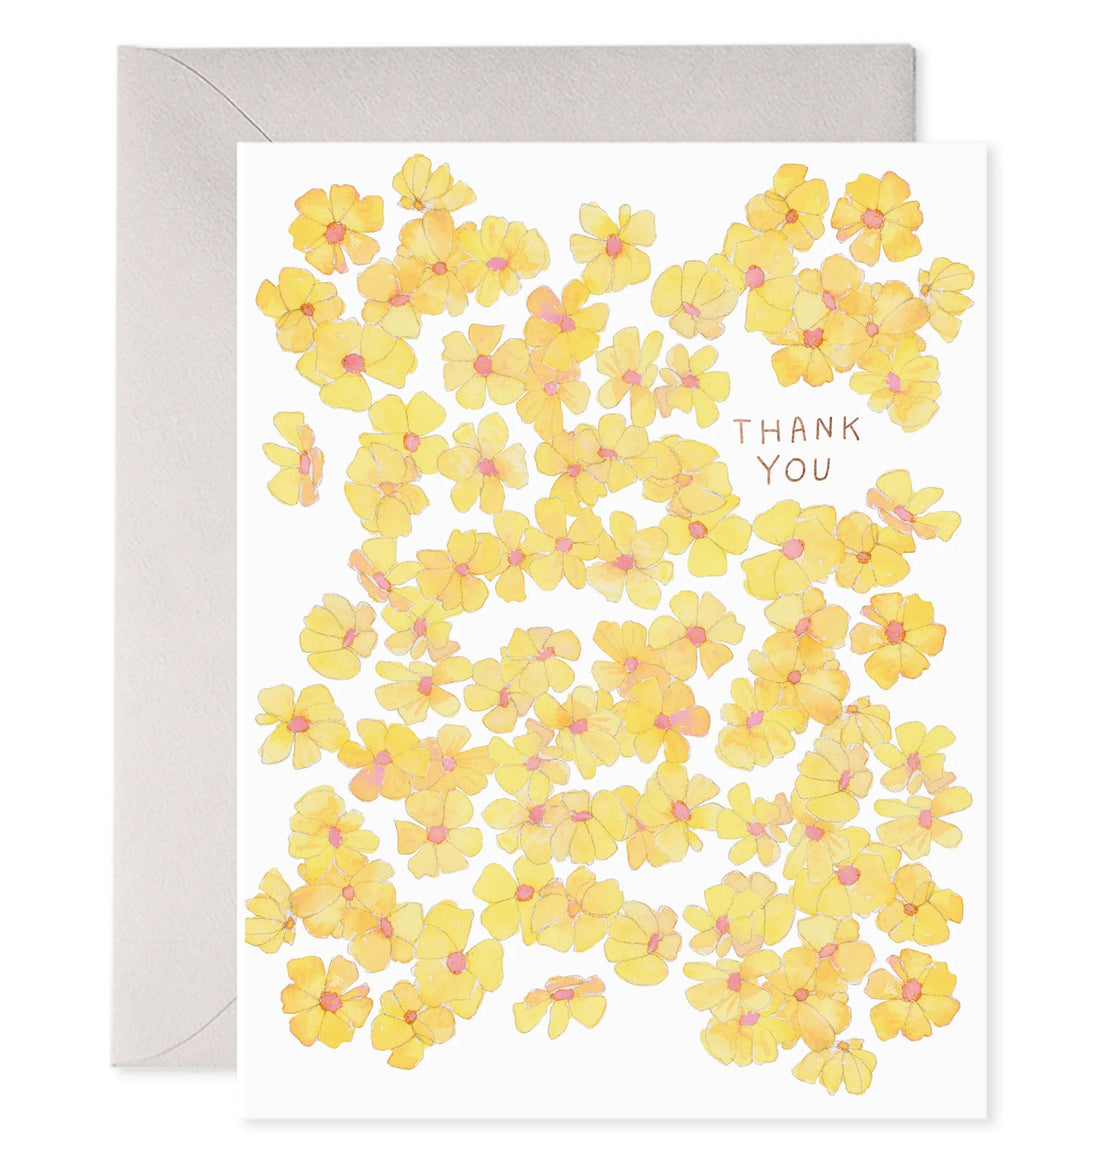 Thank You Cards by E. Frances - The Flower Crate